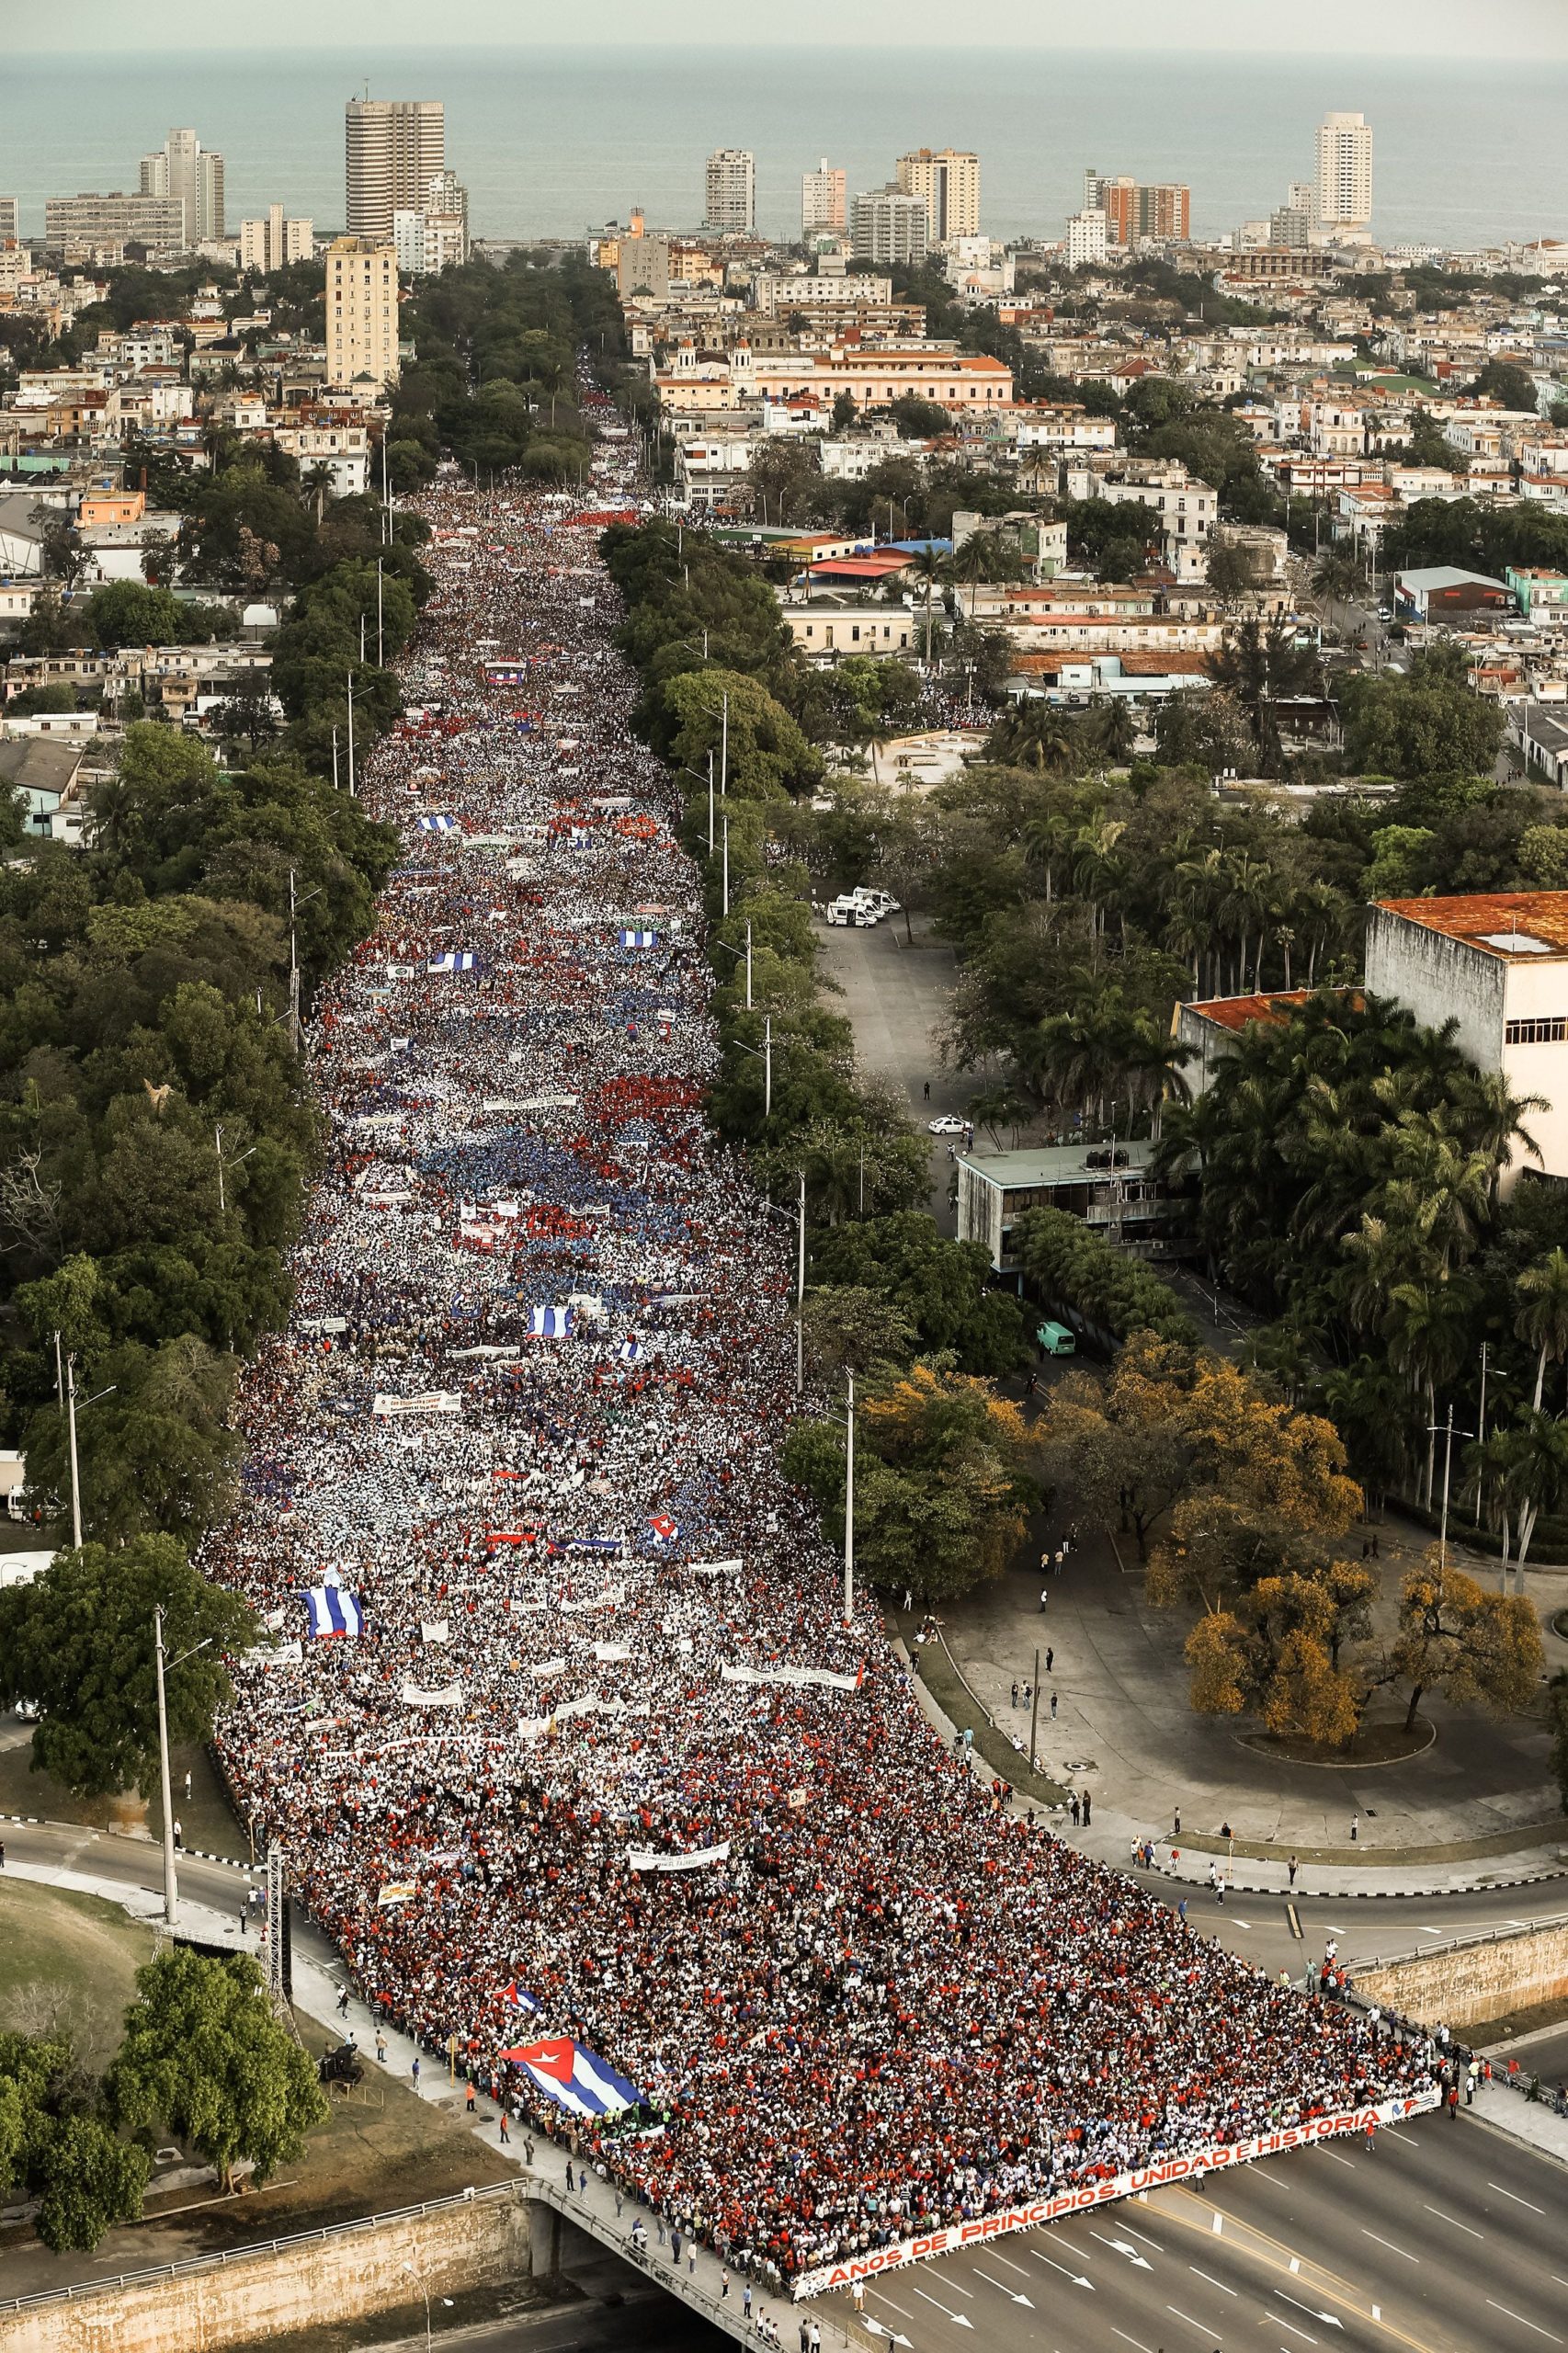 People march to Revolution Square in Havana to celebrate May Day, on May 1, 2018 (Photo: Alejandro Ernesto, Getty Images)